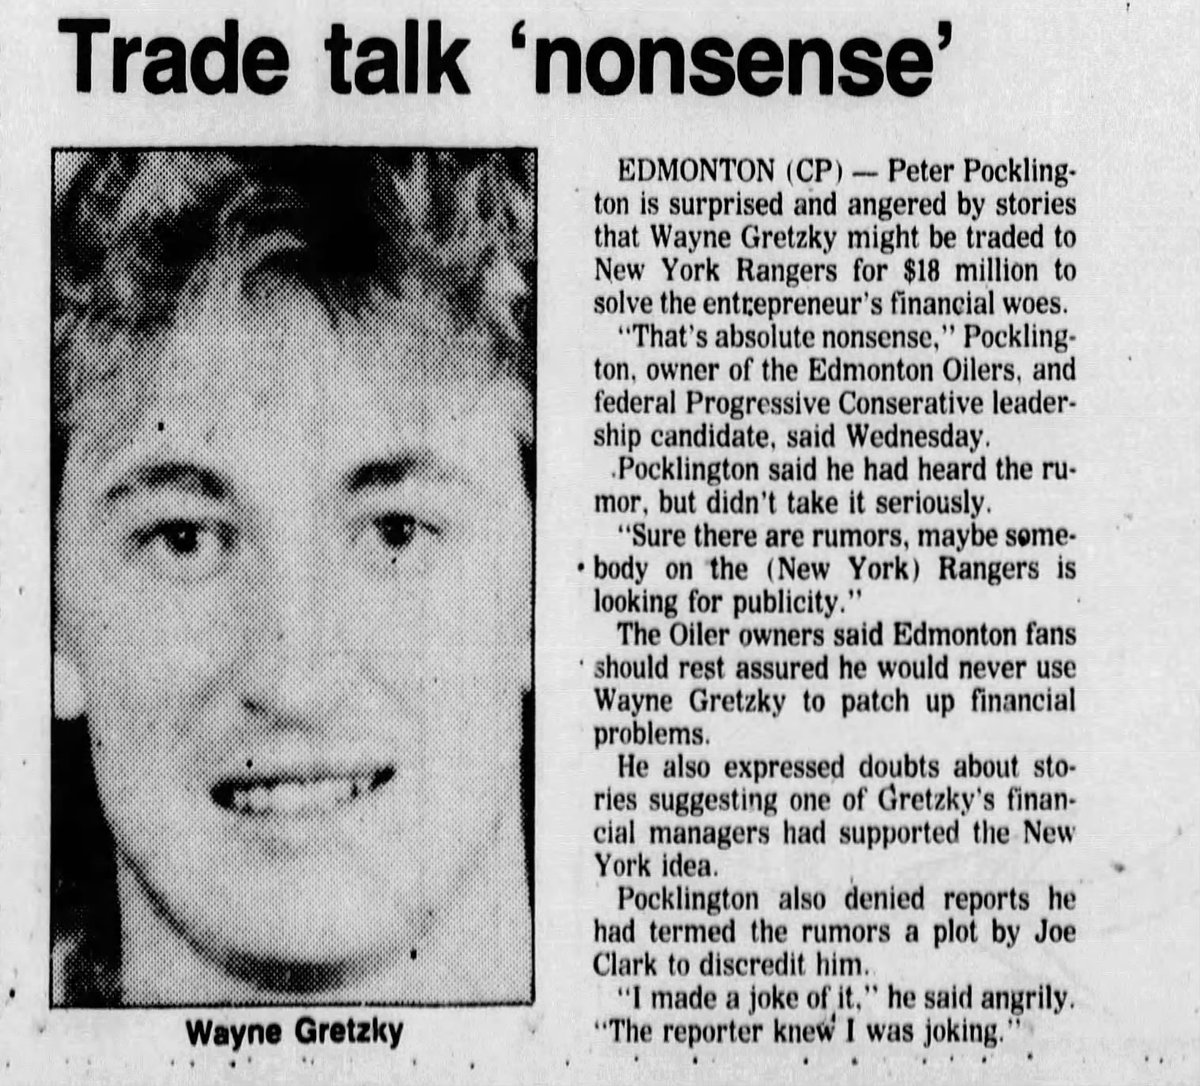 Wild rumours yesterday about the Pocklington selling Gretzky to the NY Rangers for $18M, in order to solve the enrepreneur's financial woes. 
Peter Puck assures us all that would never happen. Never ever ever